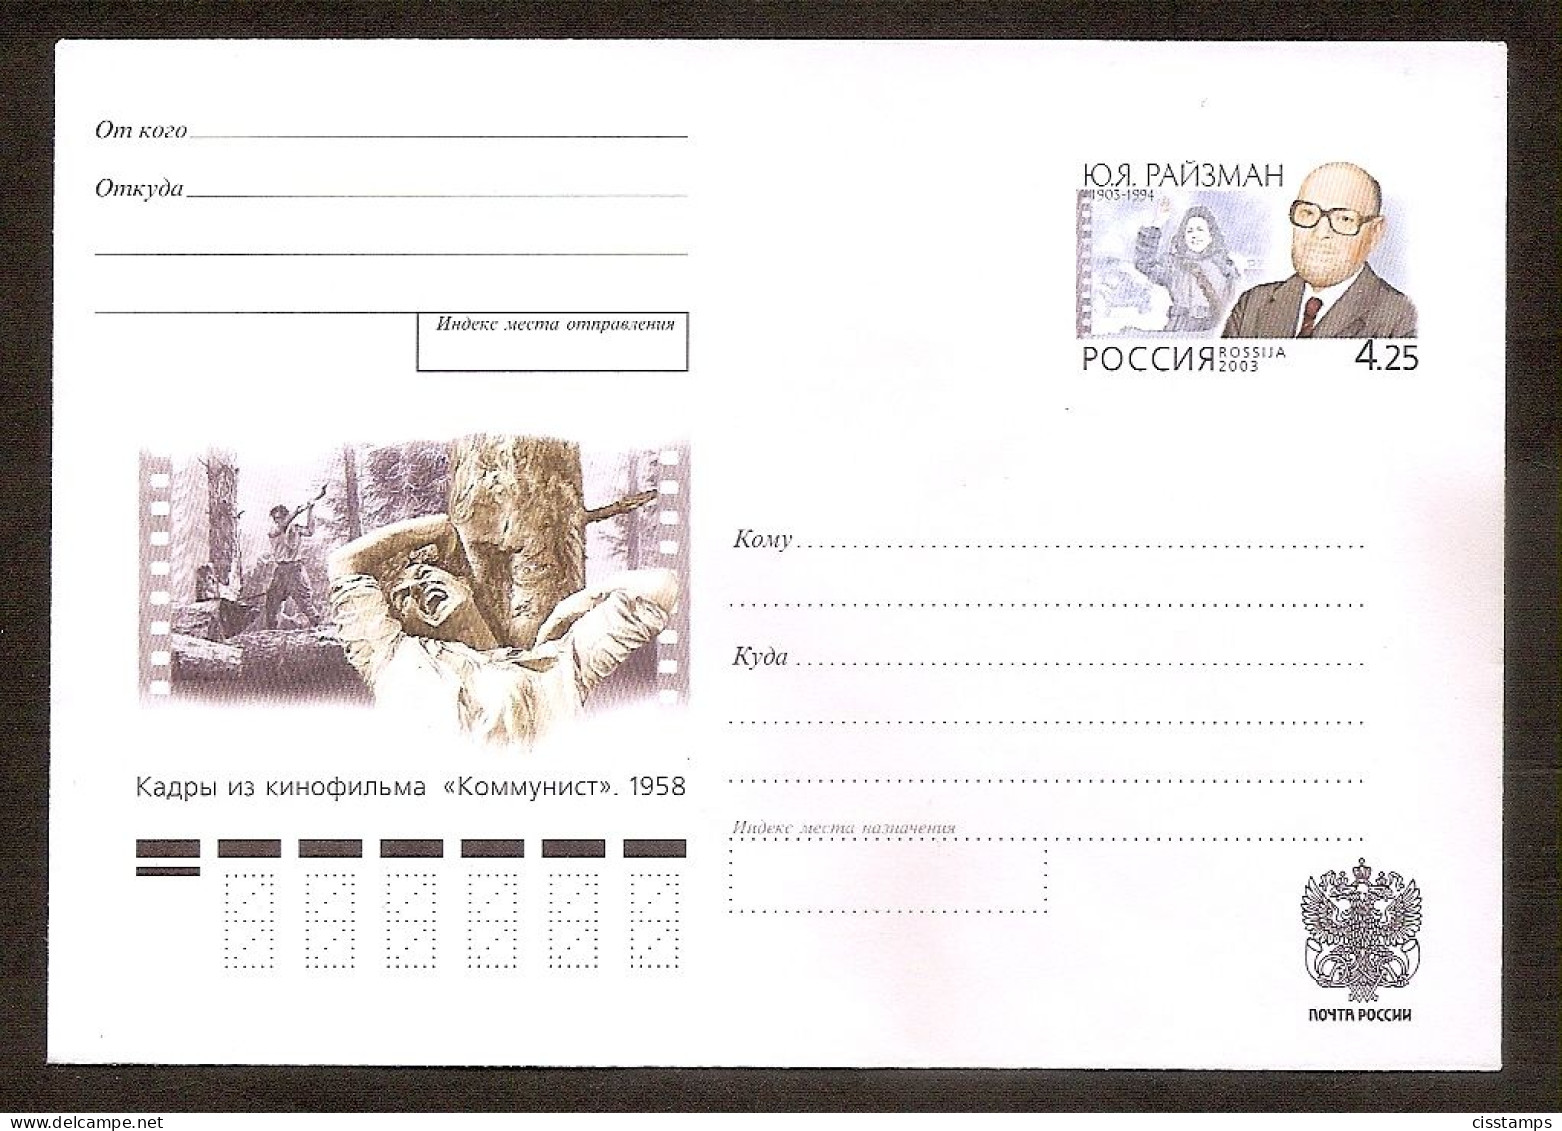 Russia 2003●Film Director Y. Raizman●Filmfragment●stamped Stationery Cover●Mi USo131 - Stamped Stationery